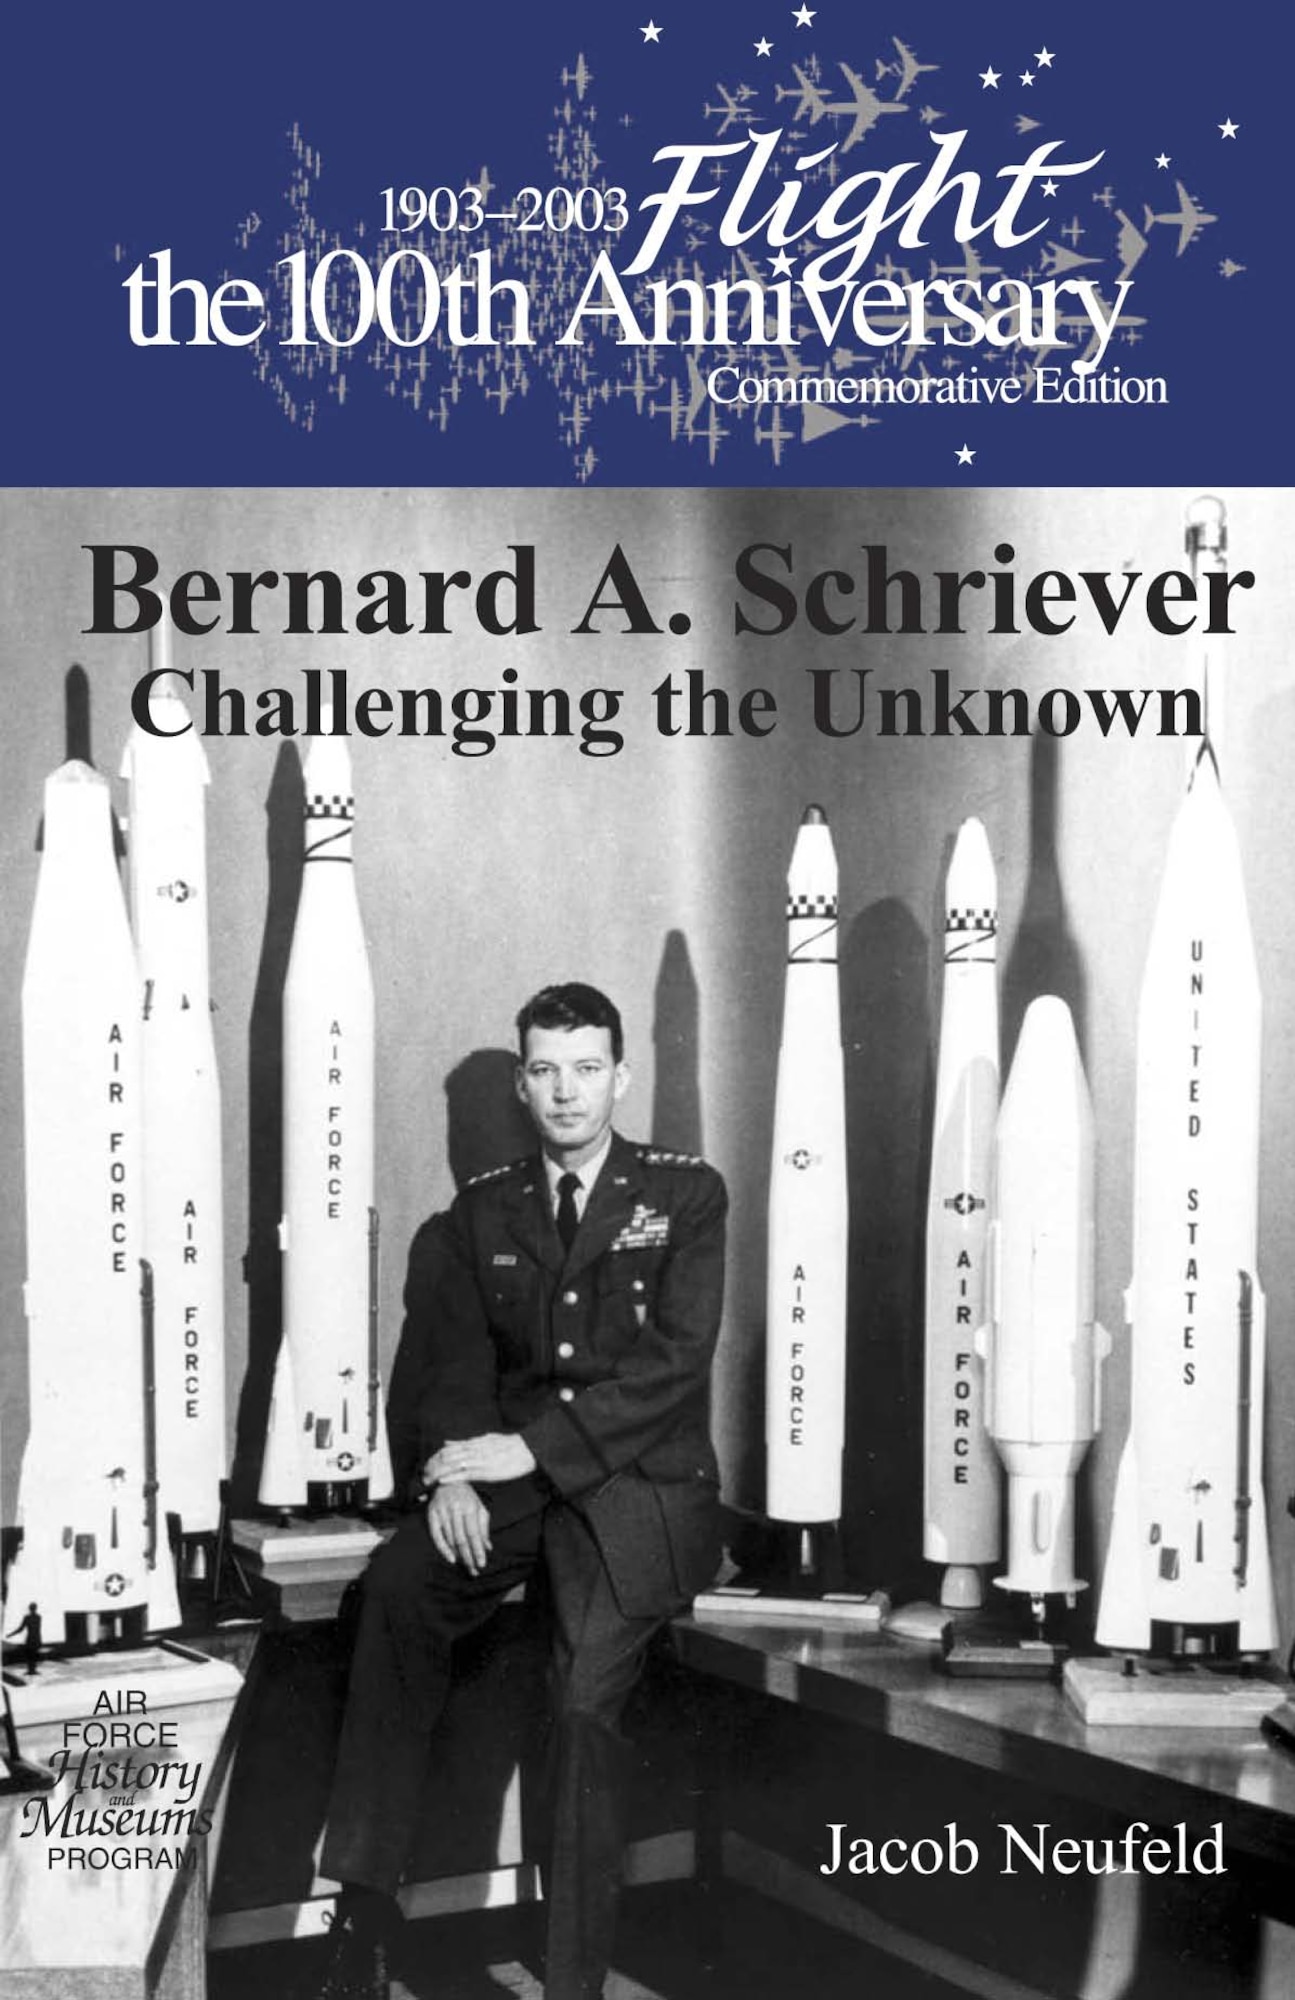 Bernard A. Schriever was to become the officer most closely associated with the development of ballistic missiles.  Ultimately he would be responsible for research, development and acquistion of all new weapons used by the US Air Force.